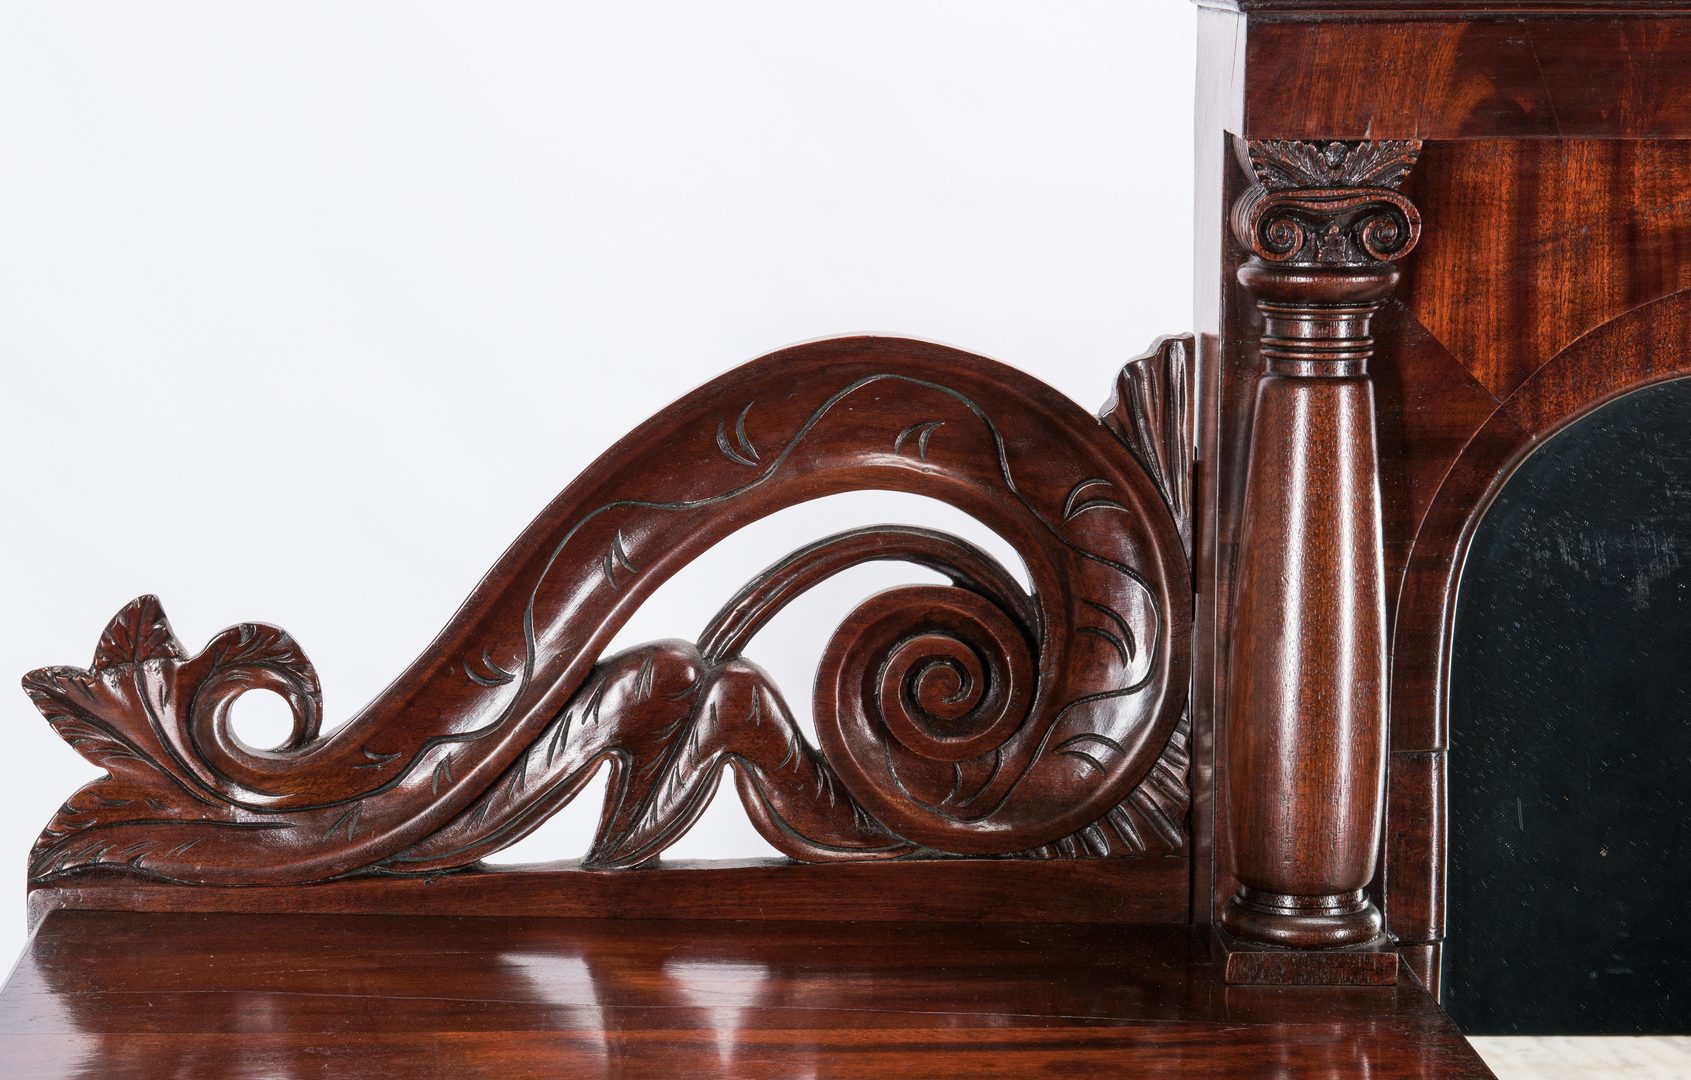 Lot 292: Classical Carved Sideboard